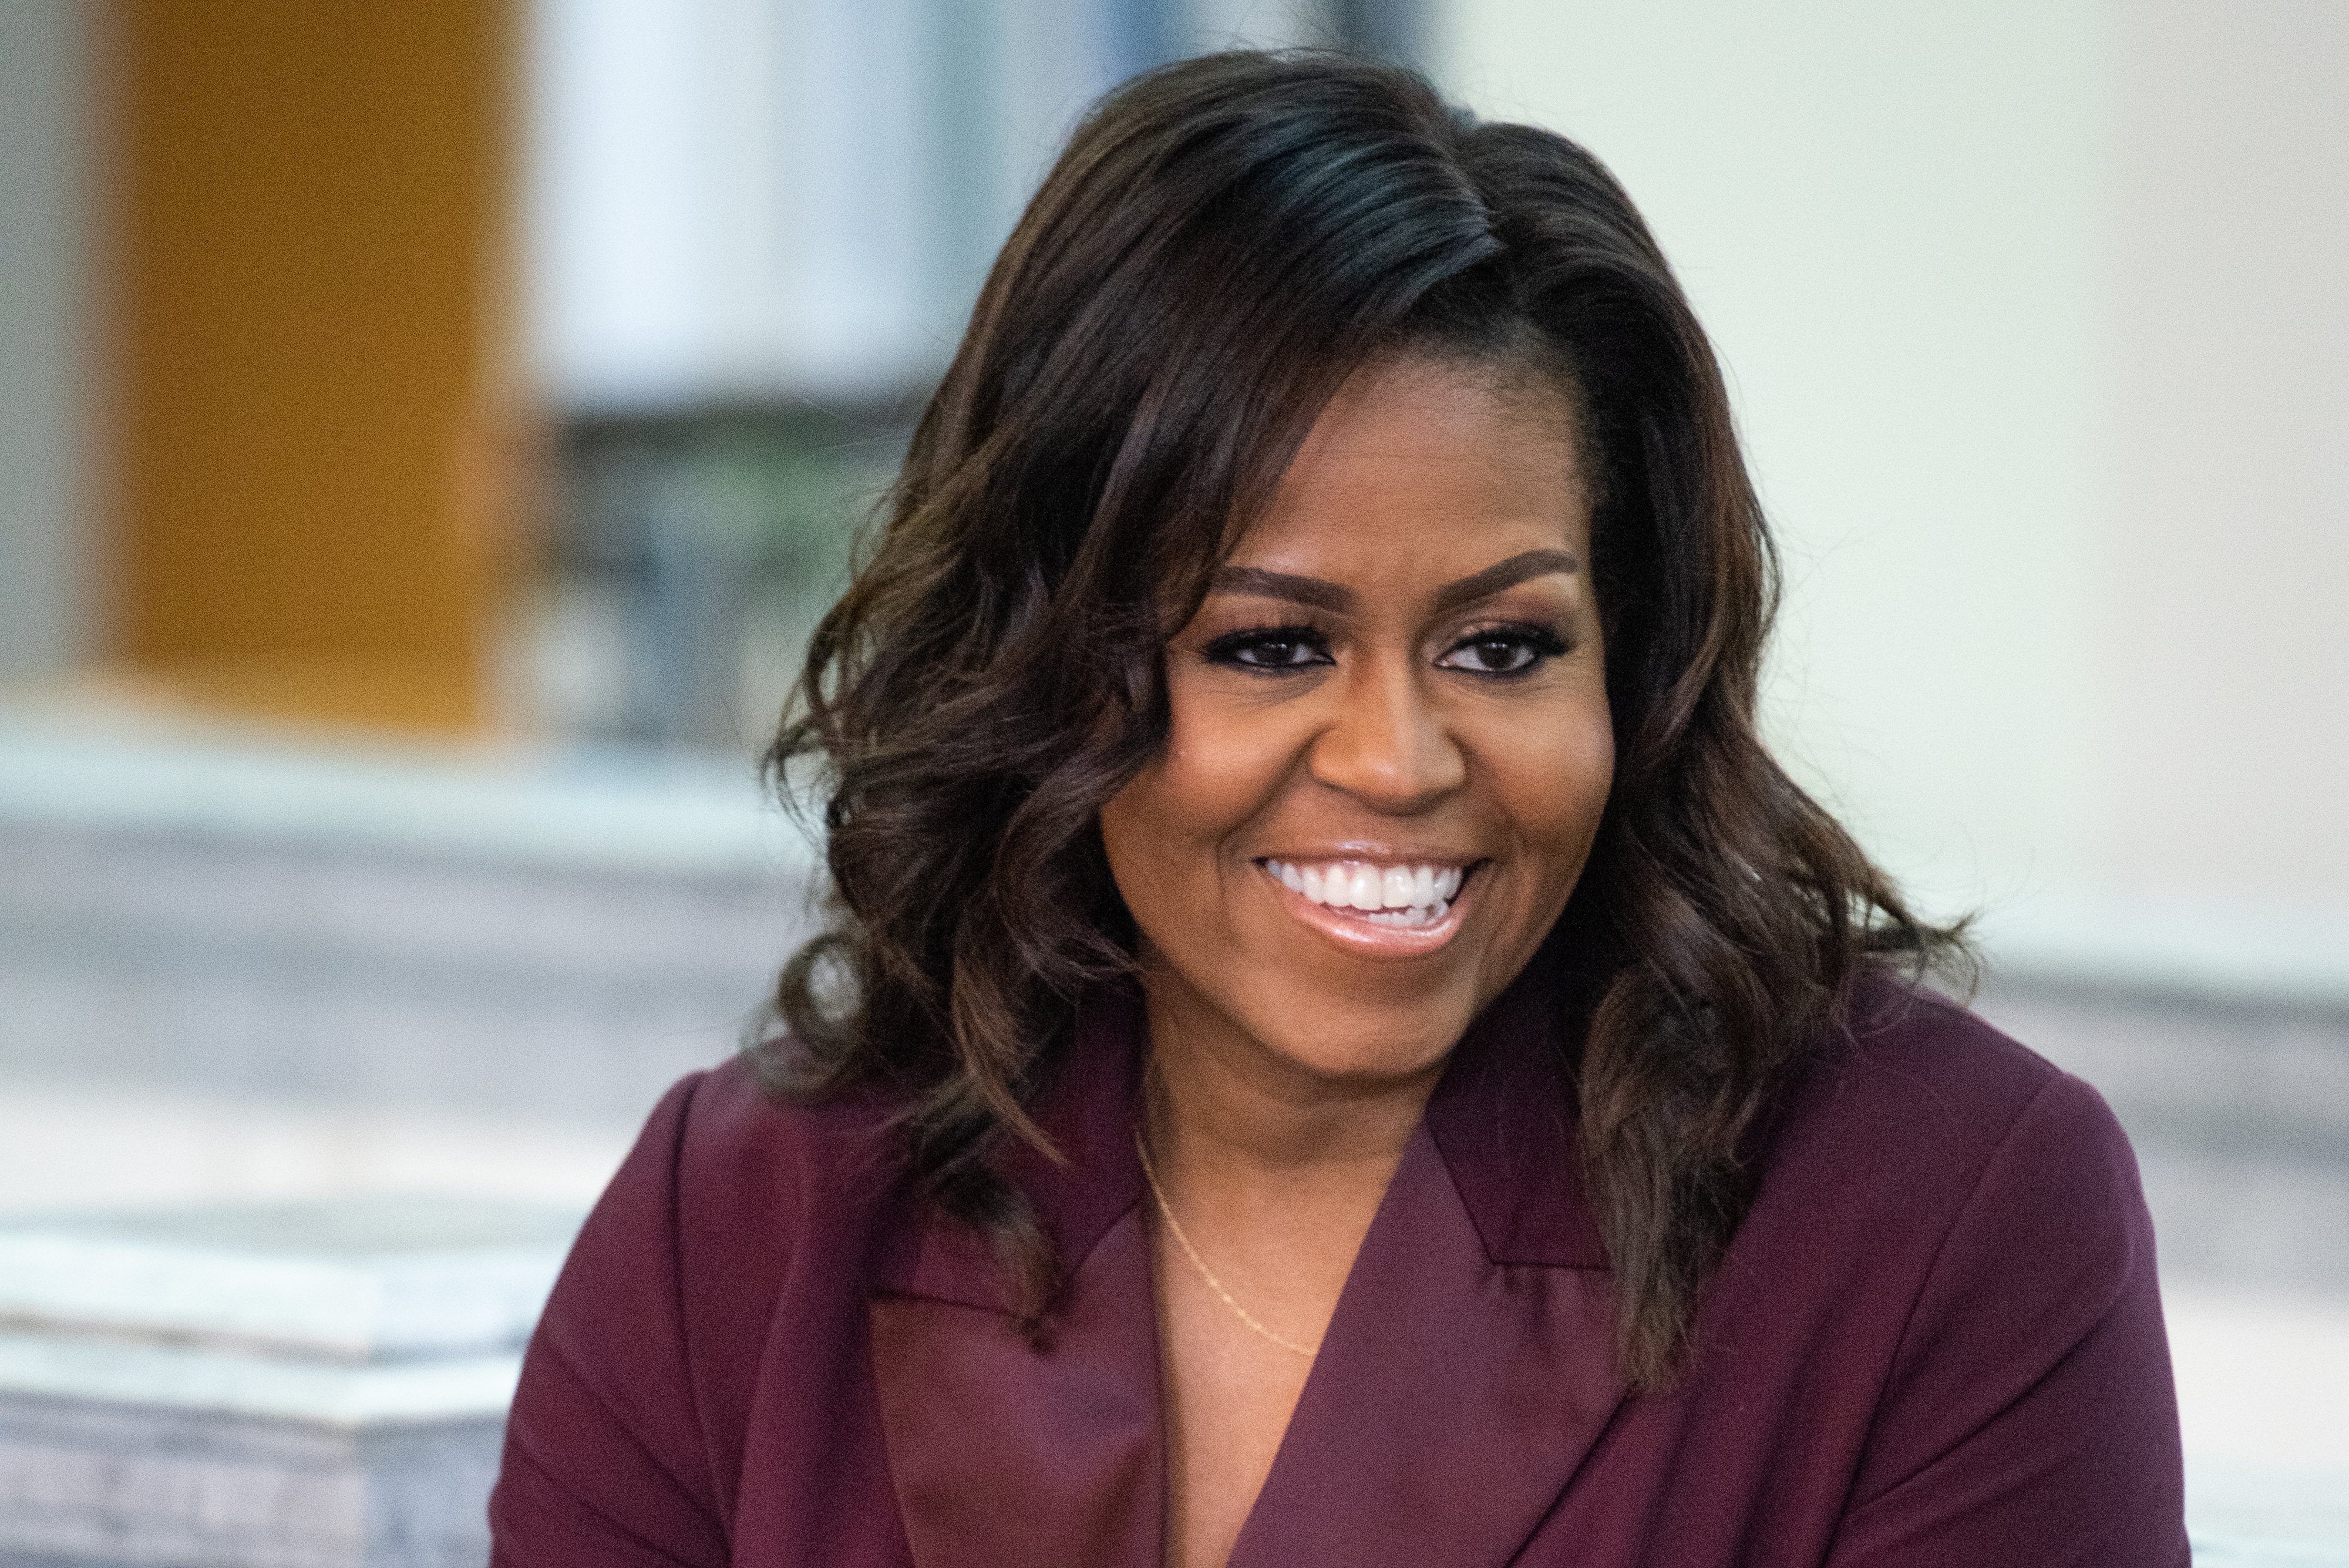 Michelle Obama speaking with a local book group about her book "Becoming" at the Tacoma Public Library main branch on March 24, 2019 in Tacoma, Washington | Photo: Getty Images